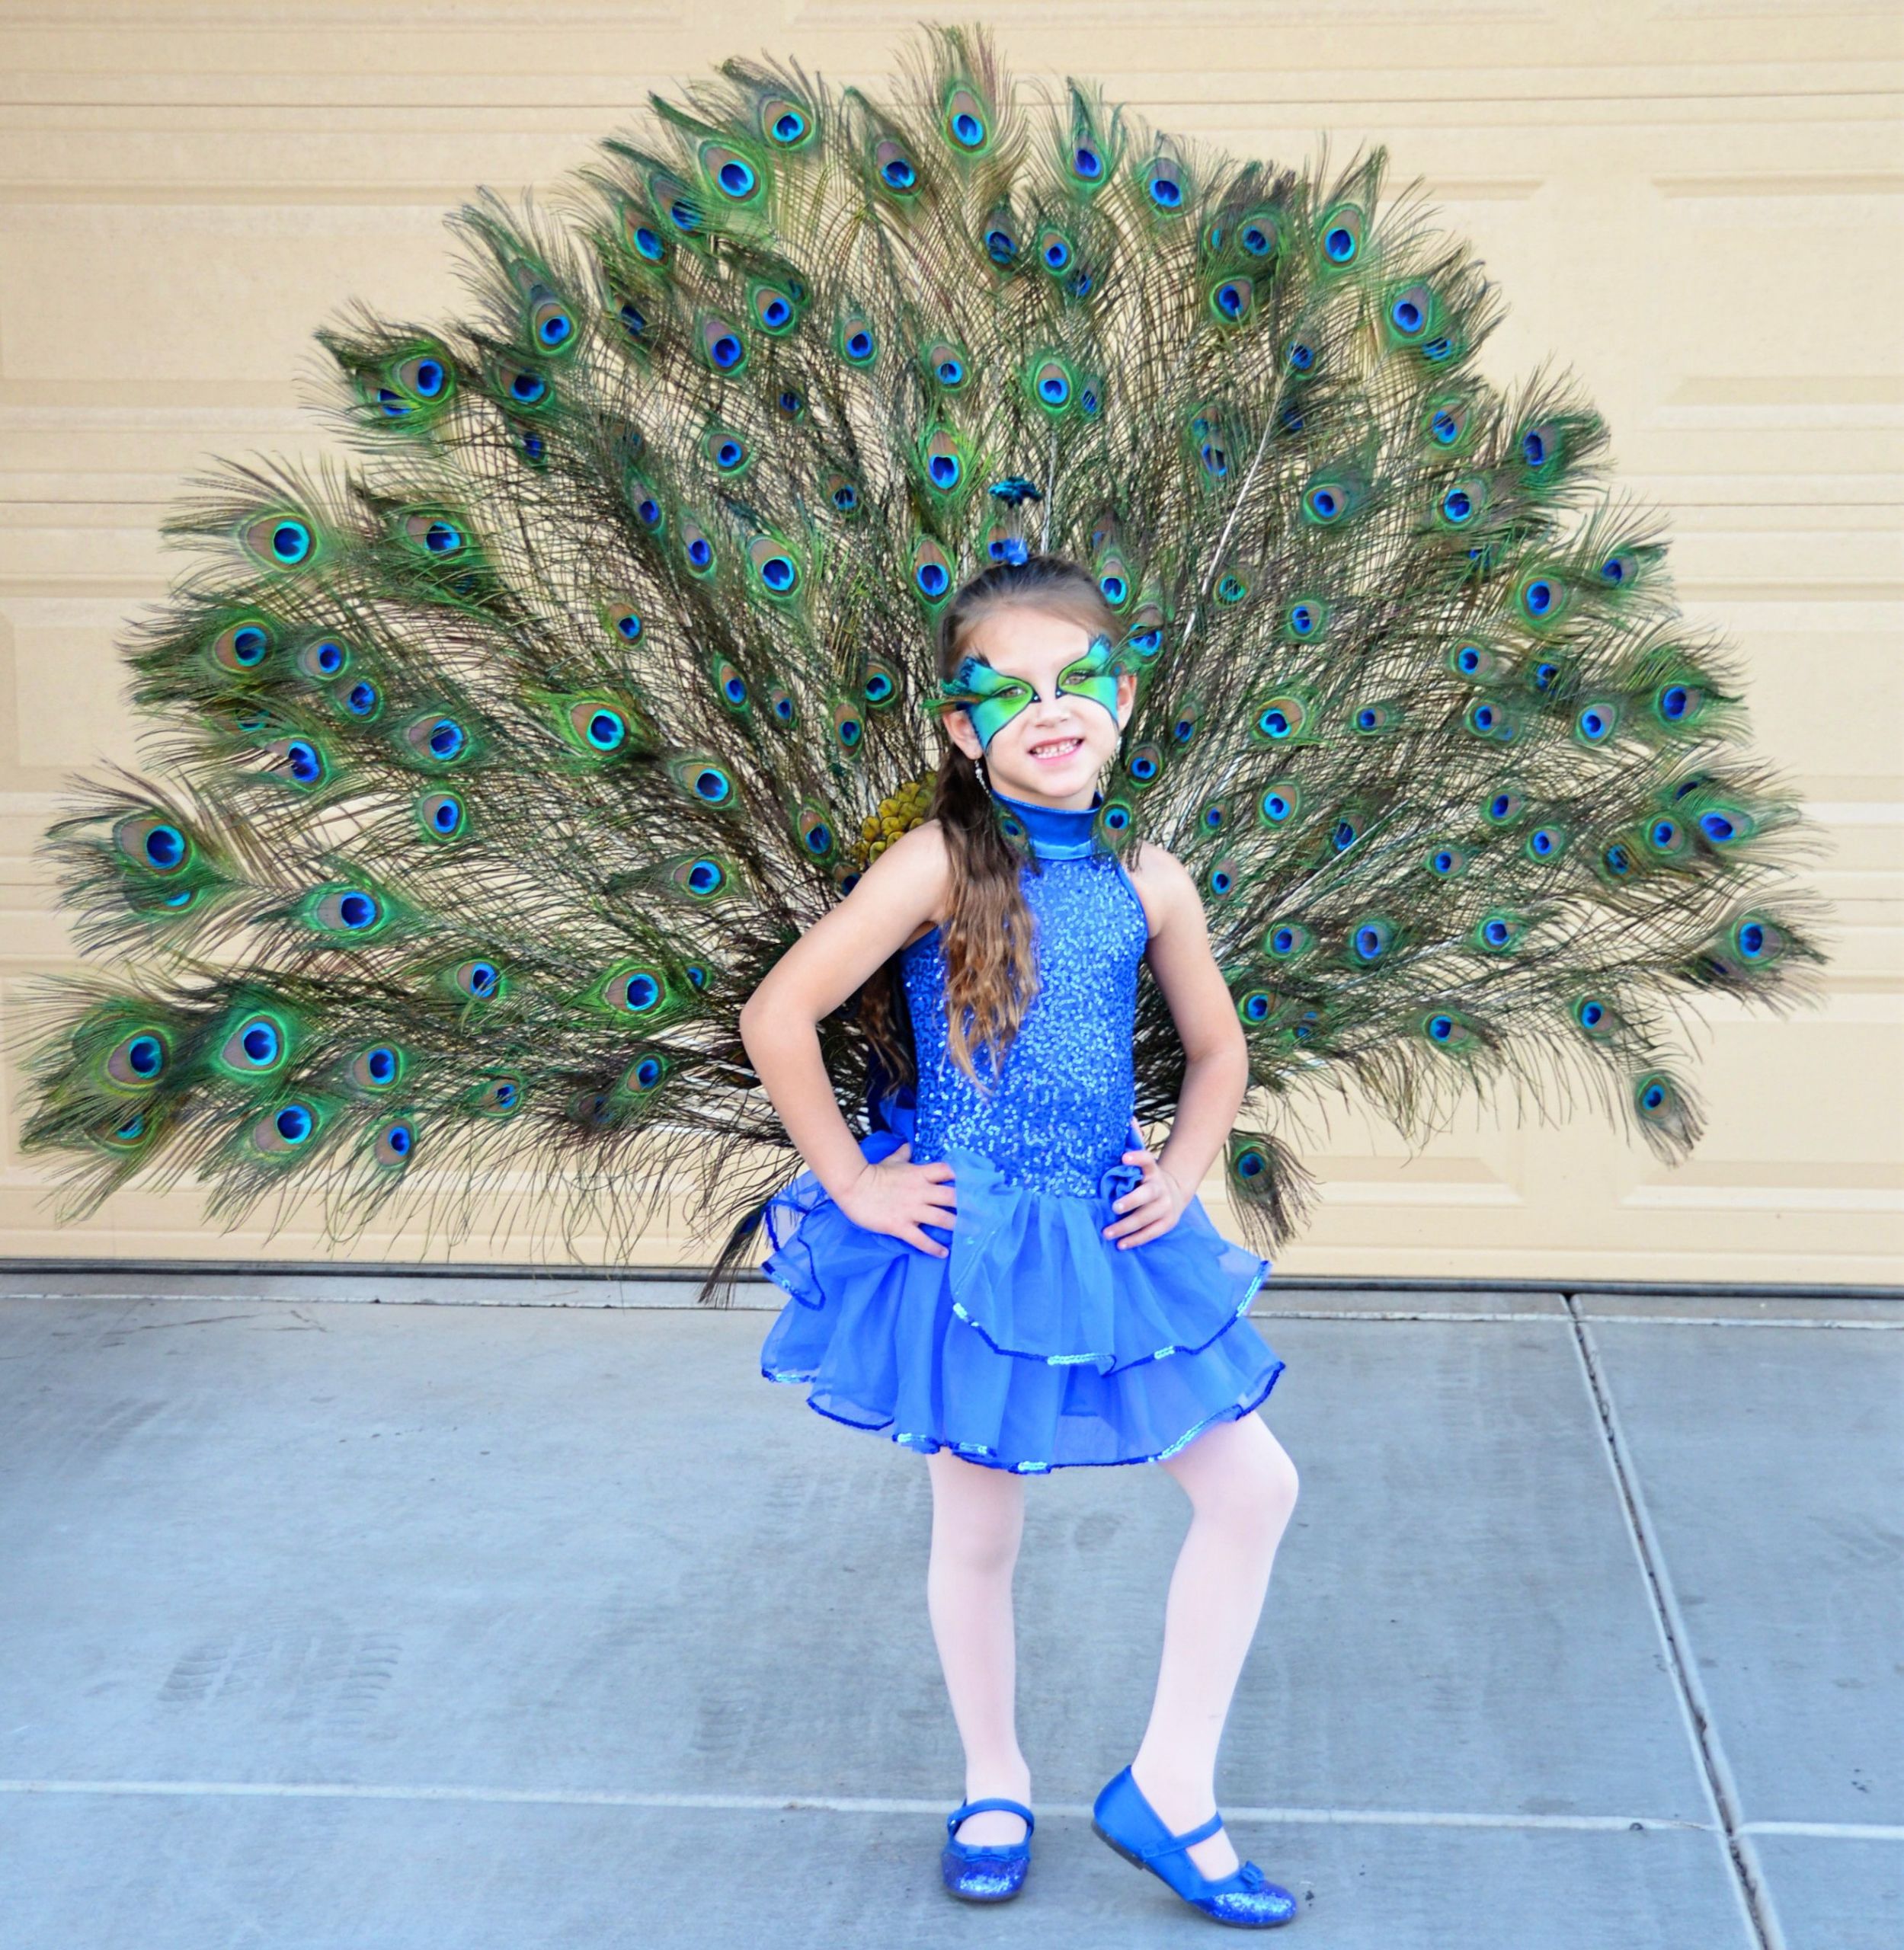 DIY Toddler Peacock Costume
 Pin by Melanie Trevino on Halloween Costume